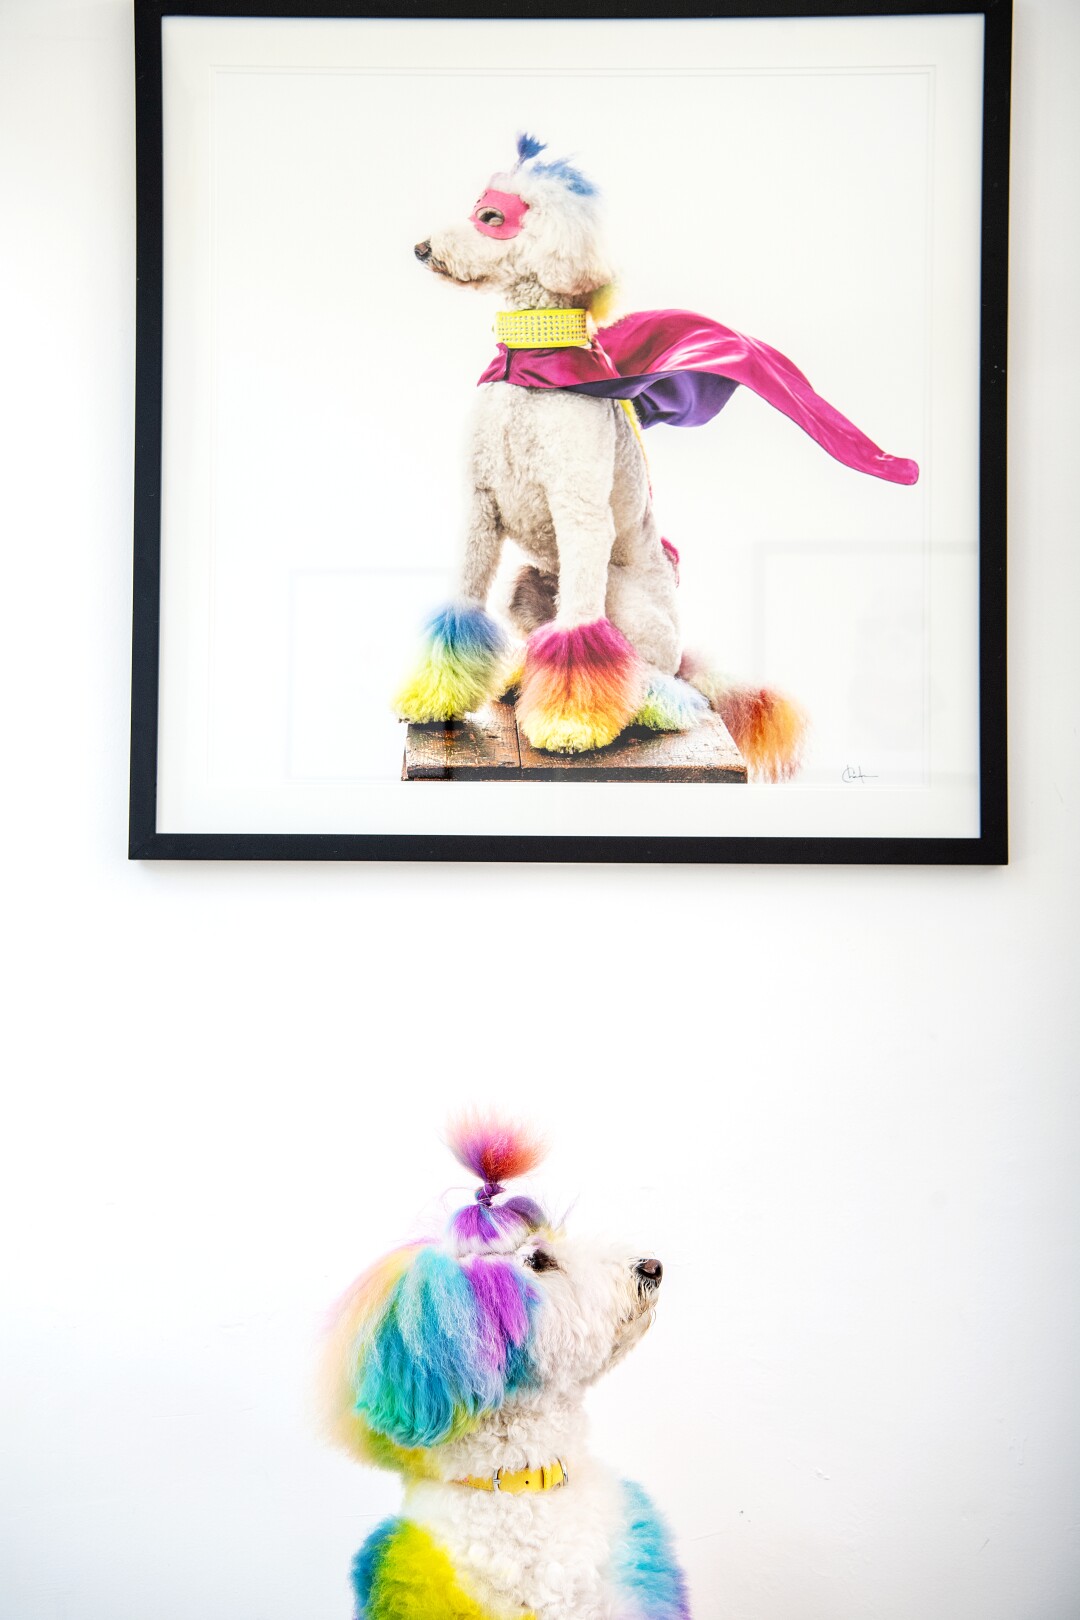 A rainbow-dyed dog sits below a photo of herself.